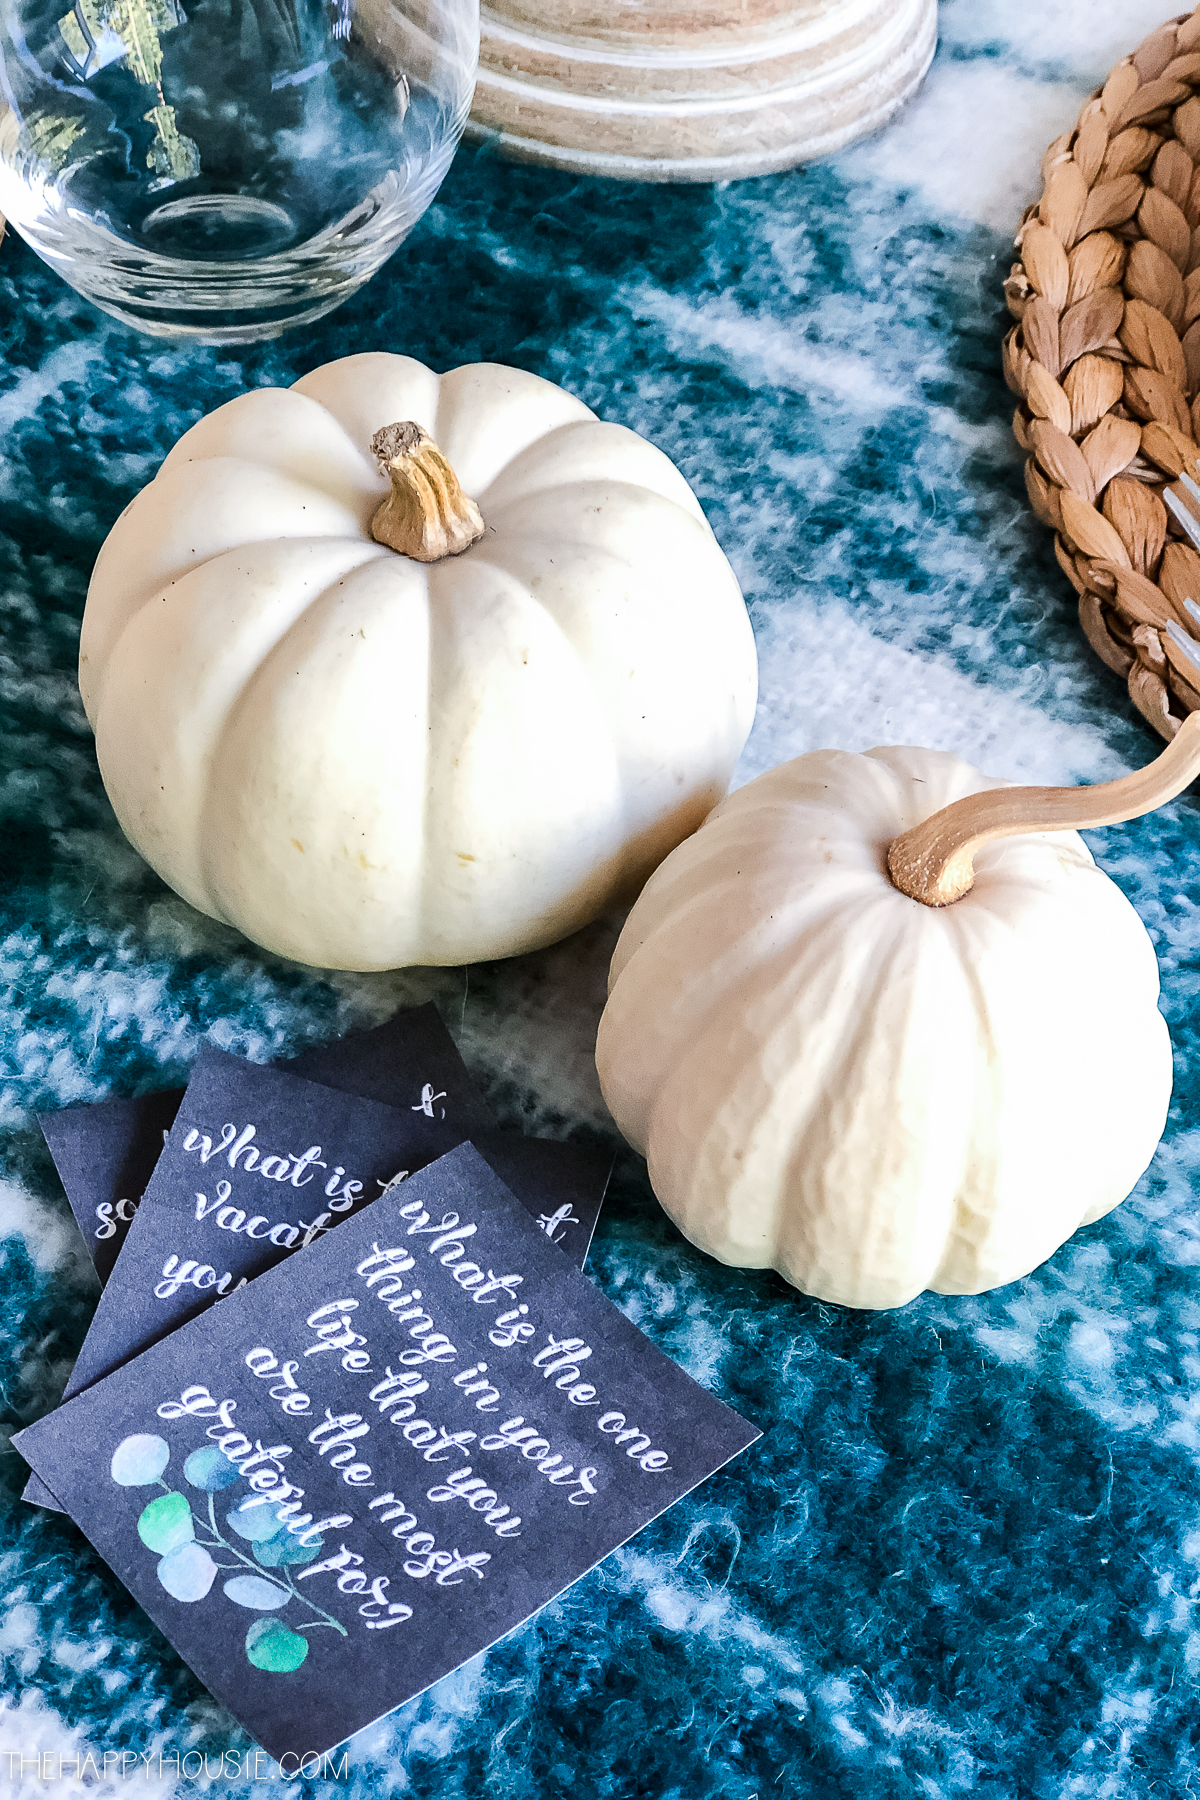 There are white pumpkins on the blue tablecloth.